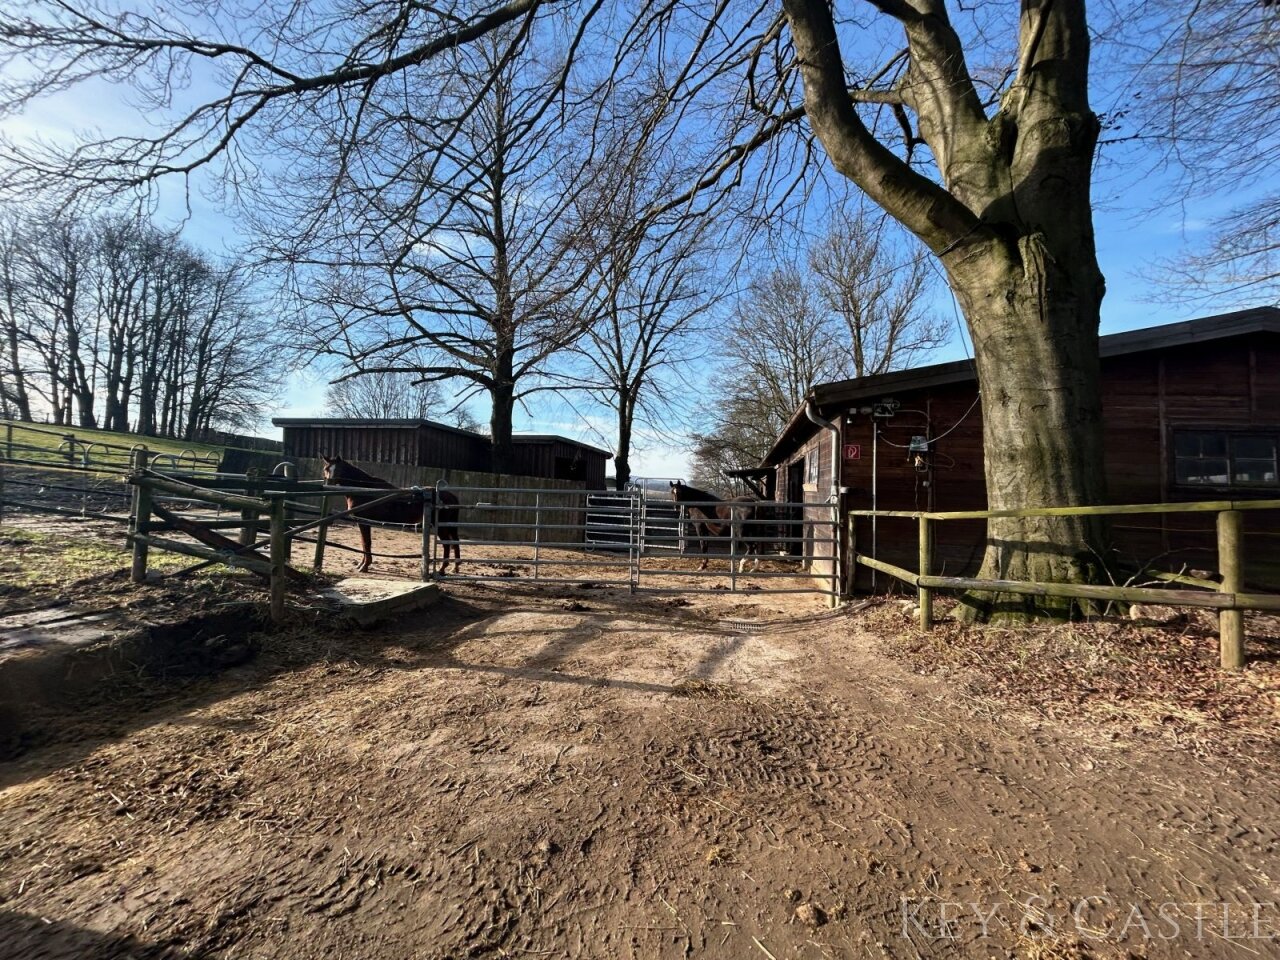 View of the playpens and barn